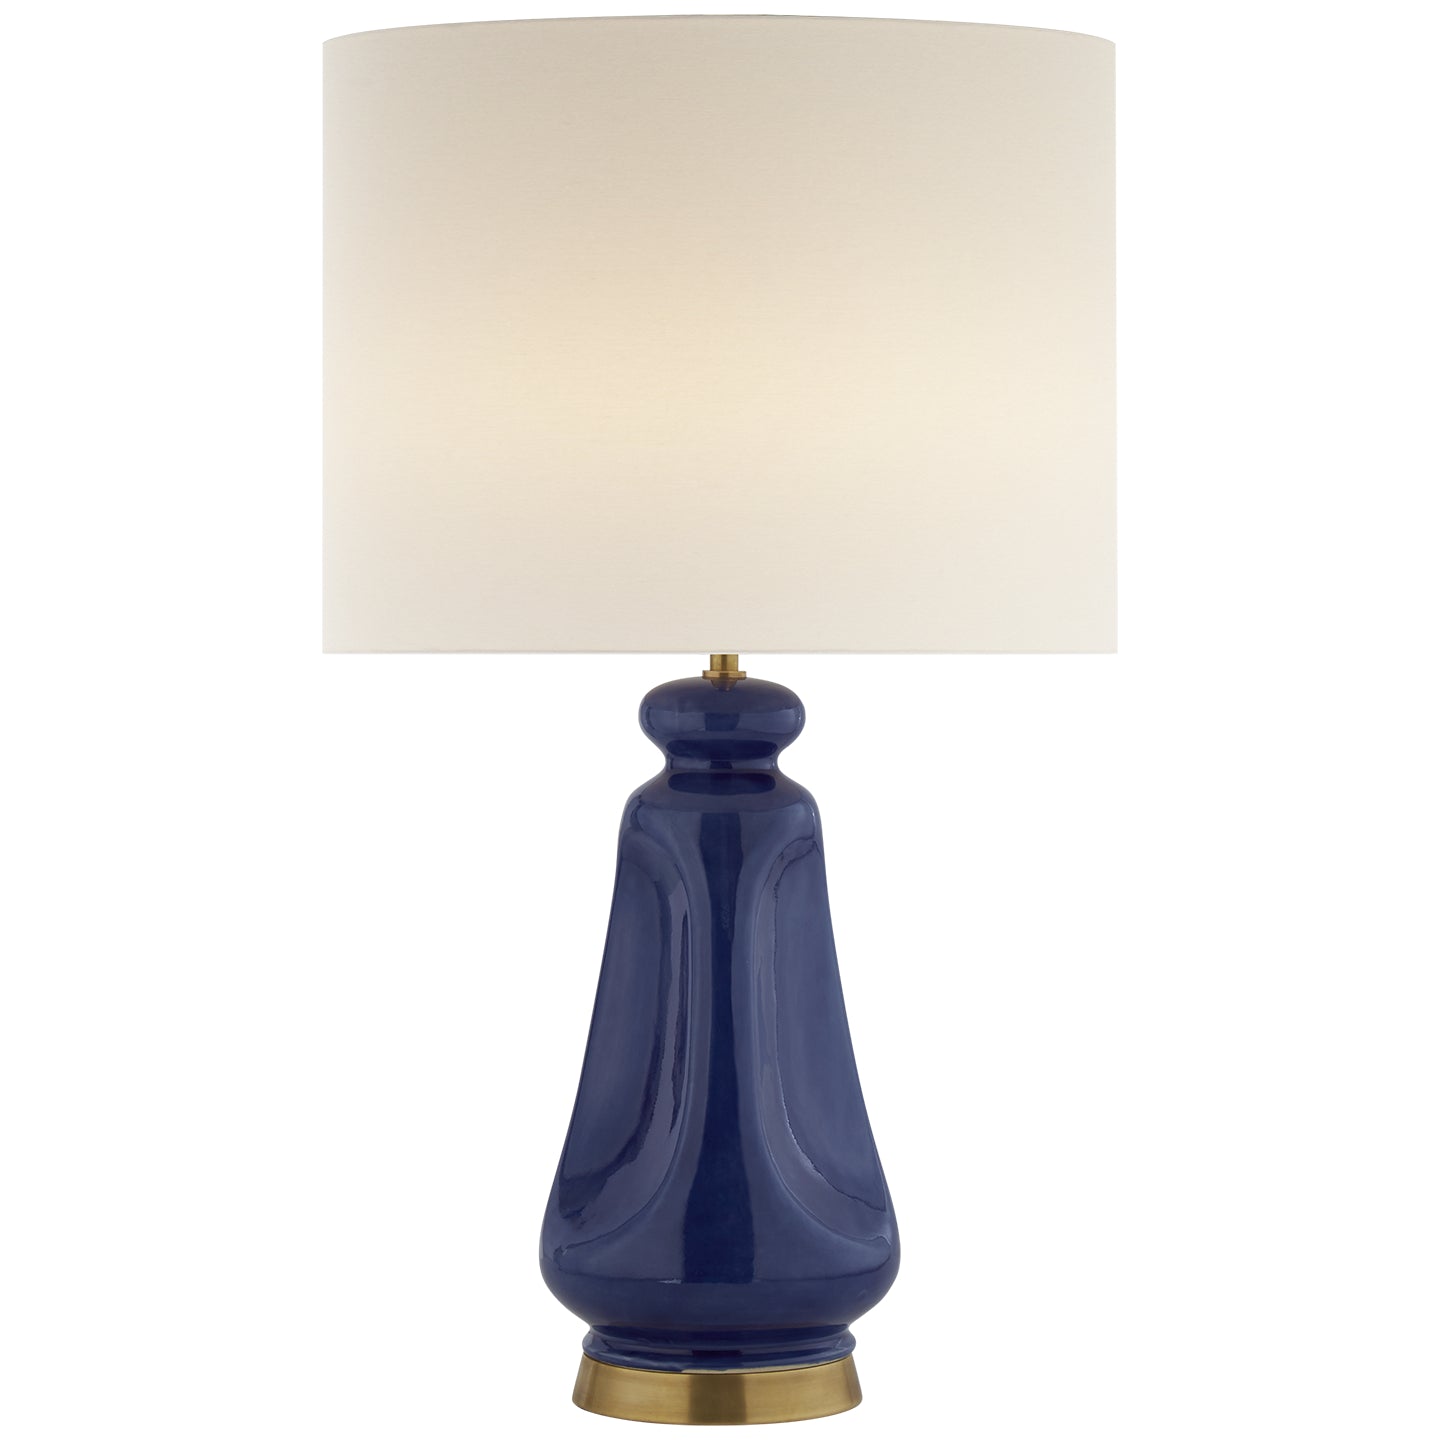 Load image into Gallery viewer, Visual Comfort Signature - ARN 3614BC-L - Two Light Table Lamp - Kapila - Blue Celadon
